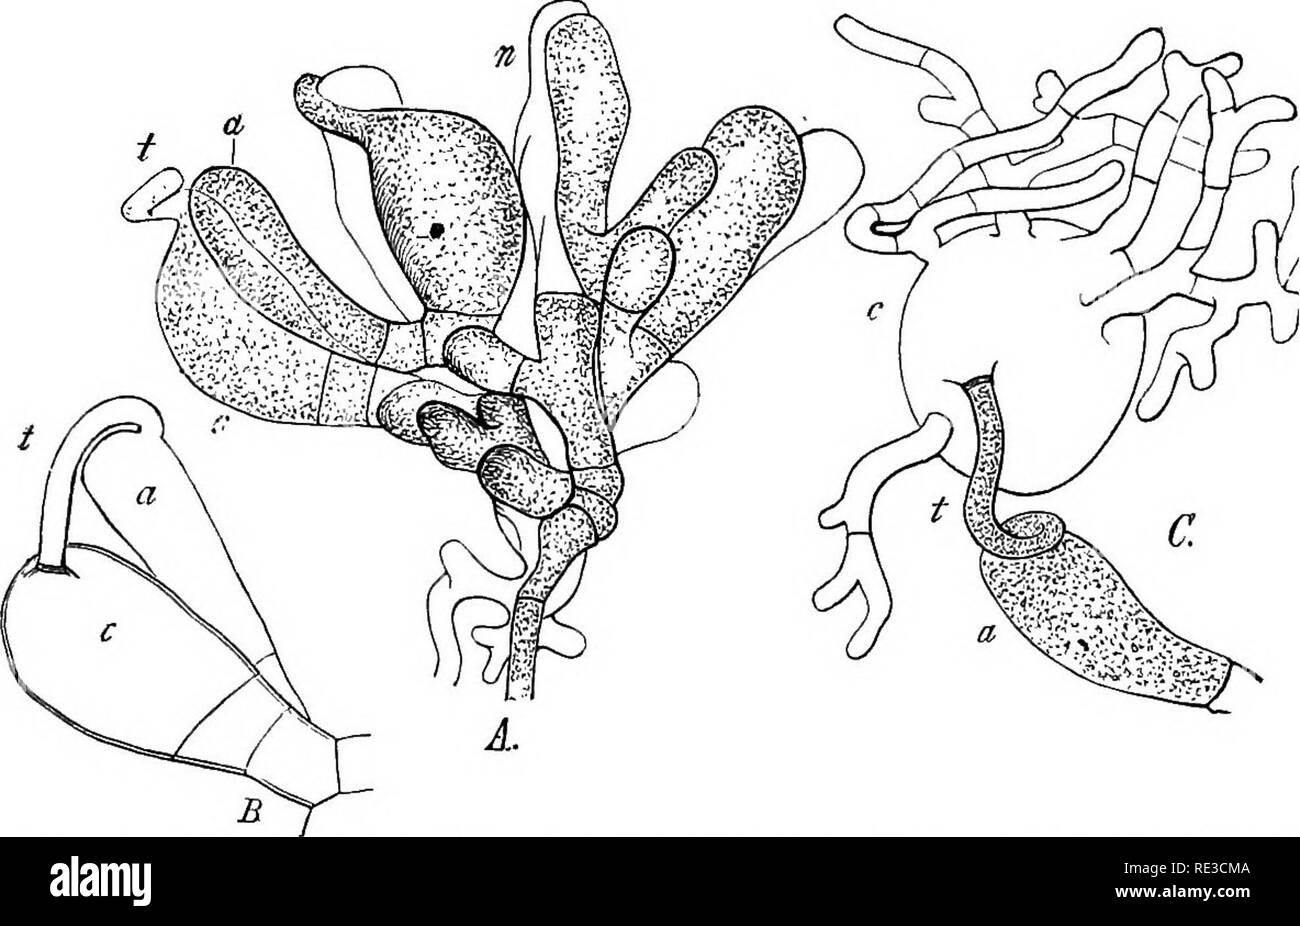 . A handbook of cryptogamic botany. Cryptogams. ASCOMYCETES 36' during growth, to permit the escape of the ascospores, and as new asc are produced (mostly taking the place of older ones), the expansion ofter continues till the hymenial surface becomes convex. Ascobolus, like Gymnoascus, has no intervening acrospores, and thi germinating ascospore gives rise to a thallus which bears the sporocarj directly. It is a saprophyte, and the species abound on dung. 6. Pyronema (Fckl.).—Pyronema confluens (Tul.) (or Peziza con fluens, Pers., as it was formerly called), which, when mature, forms a dis co Stock Photo